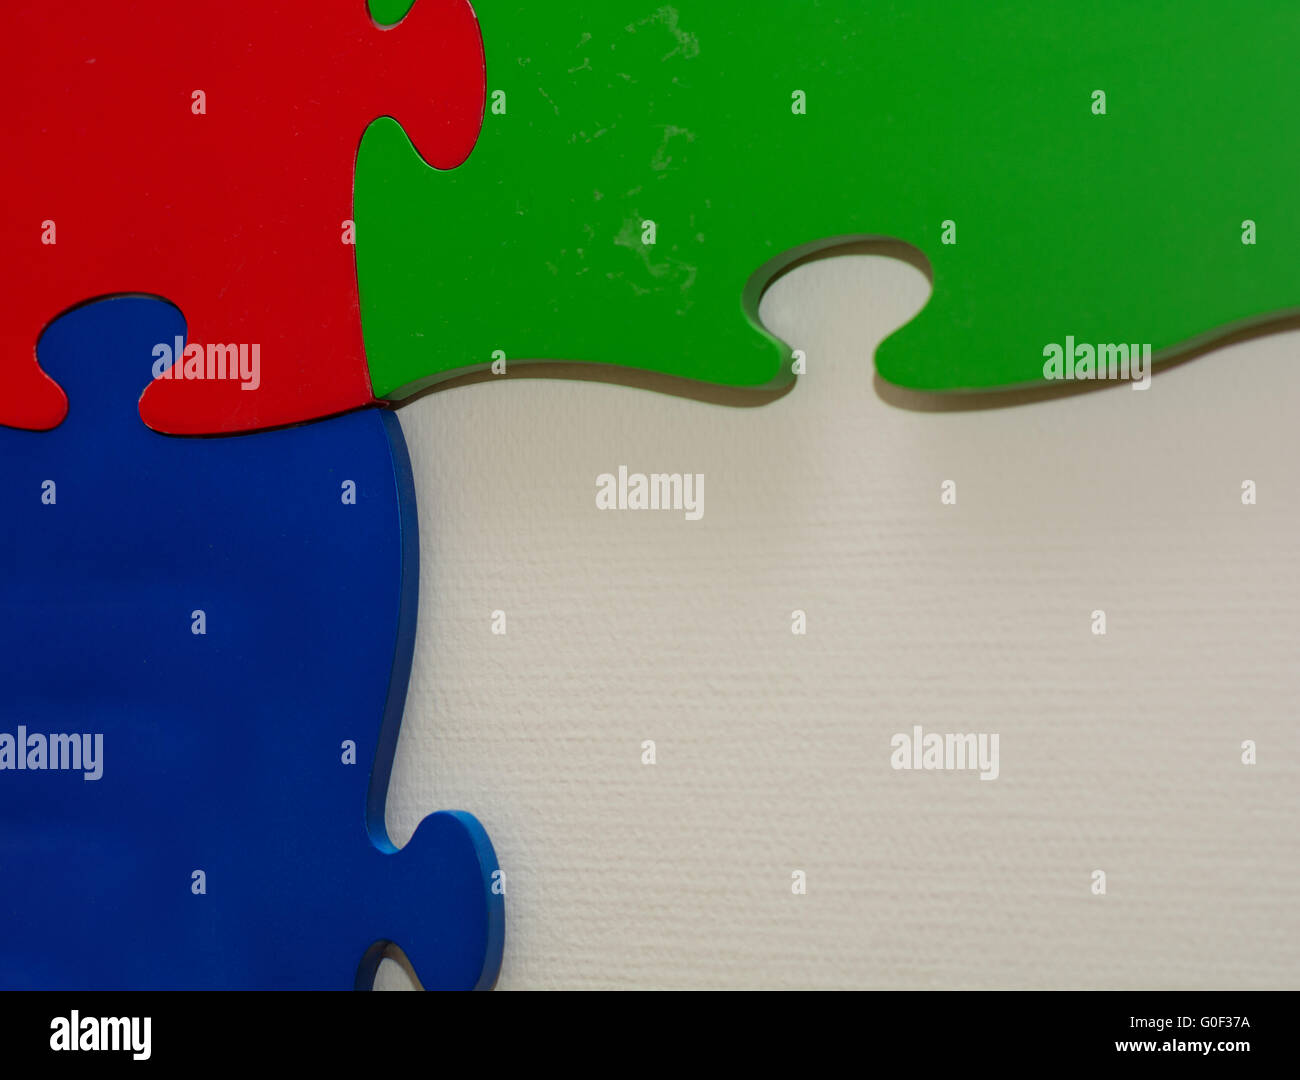 three giant puzzle pieces with intense colors Stock Photo